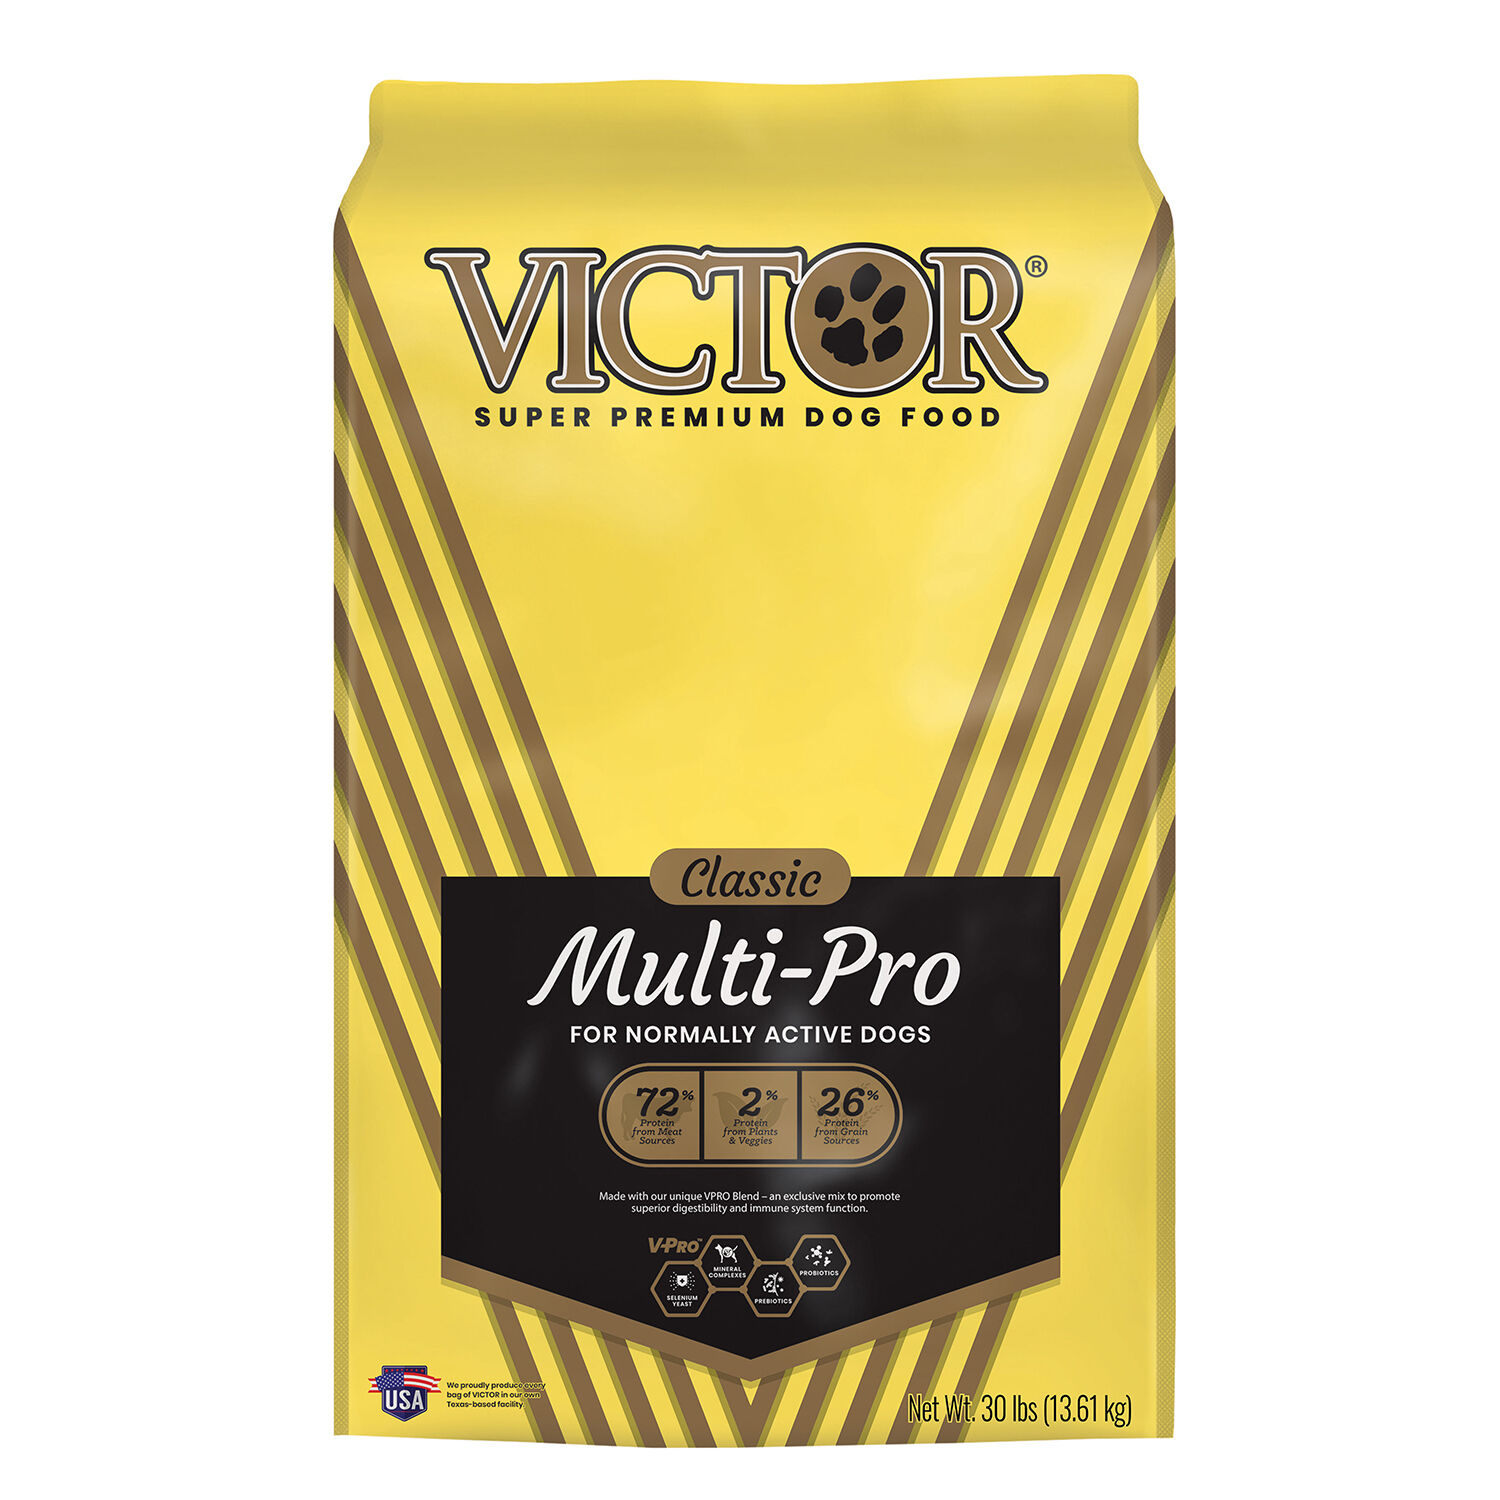 854524005214_30lb_VICTOR_Classic_MultiPro_Front.jpg